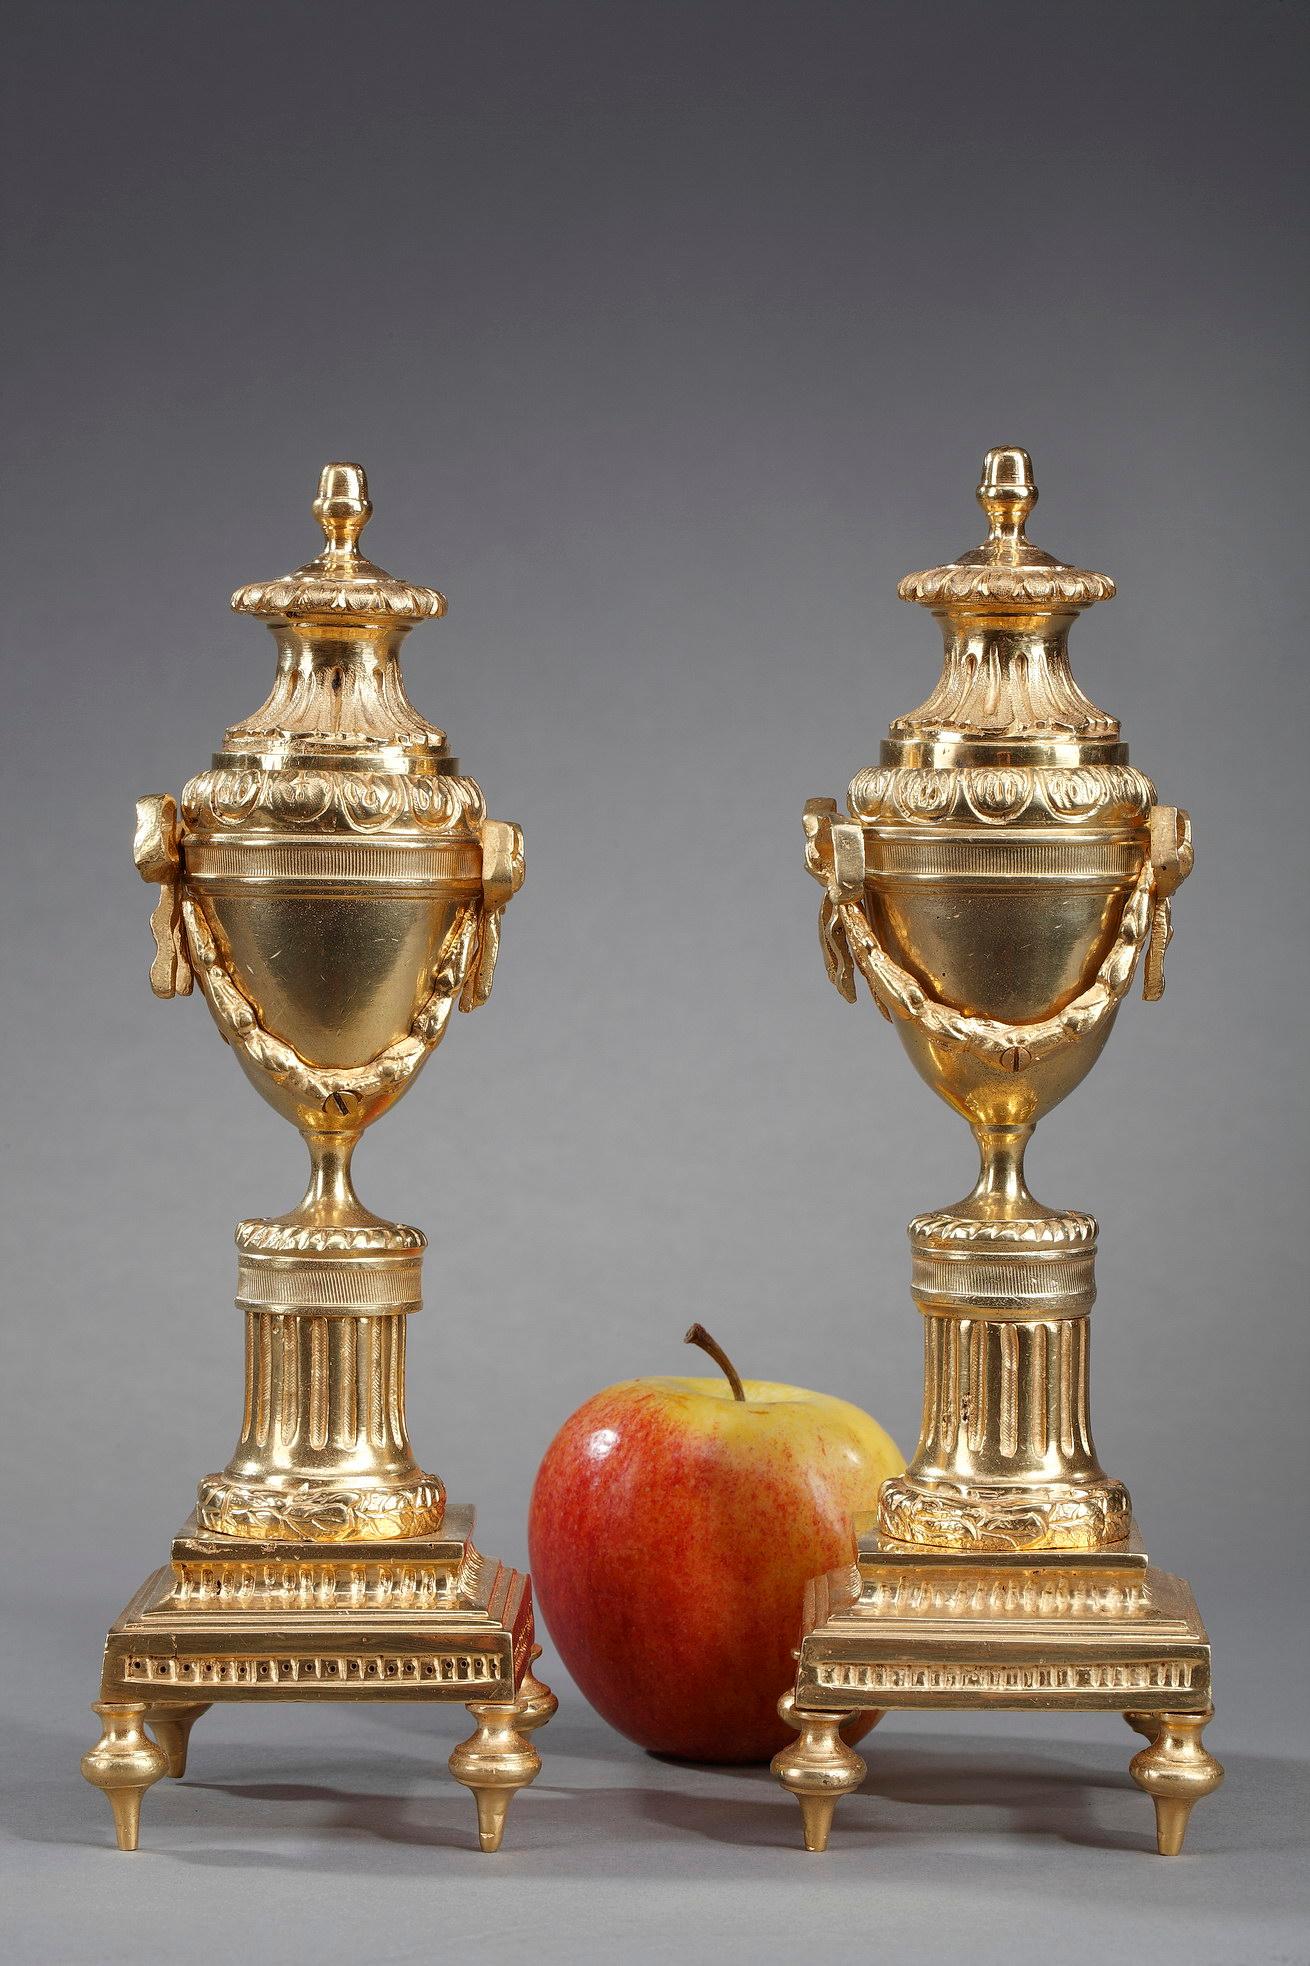 Pair of small Louis XVI style cassolettes in gilt bronze acting both as torches and urns. The urns are decorated with garlands of laurels and rests on a fluted column. The lid of the cassolette is reversible: one side serves as a candle holder and